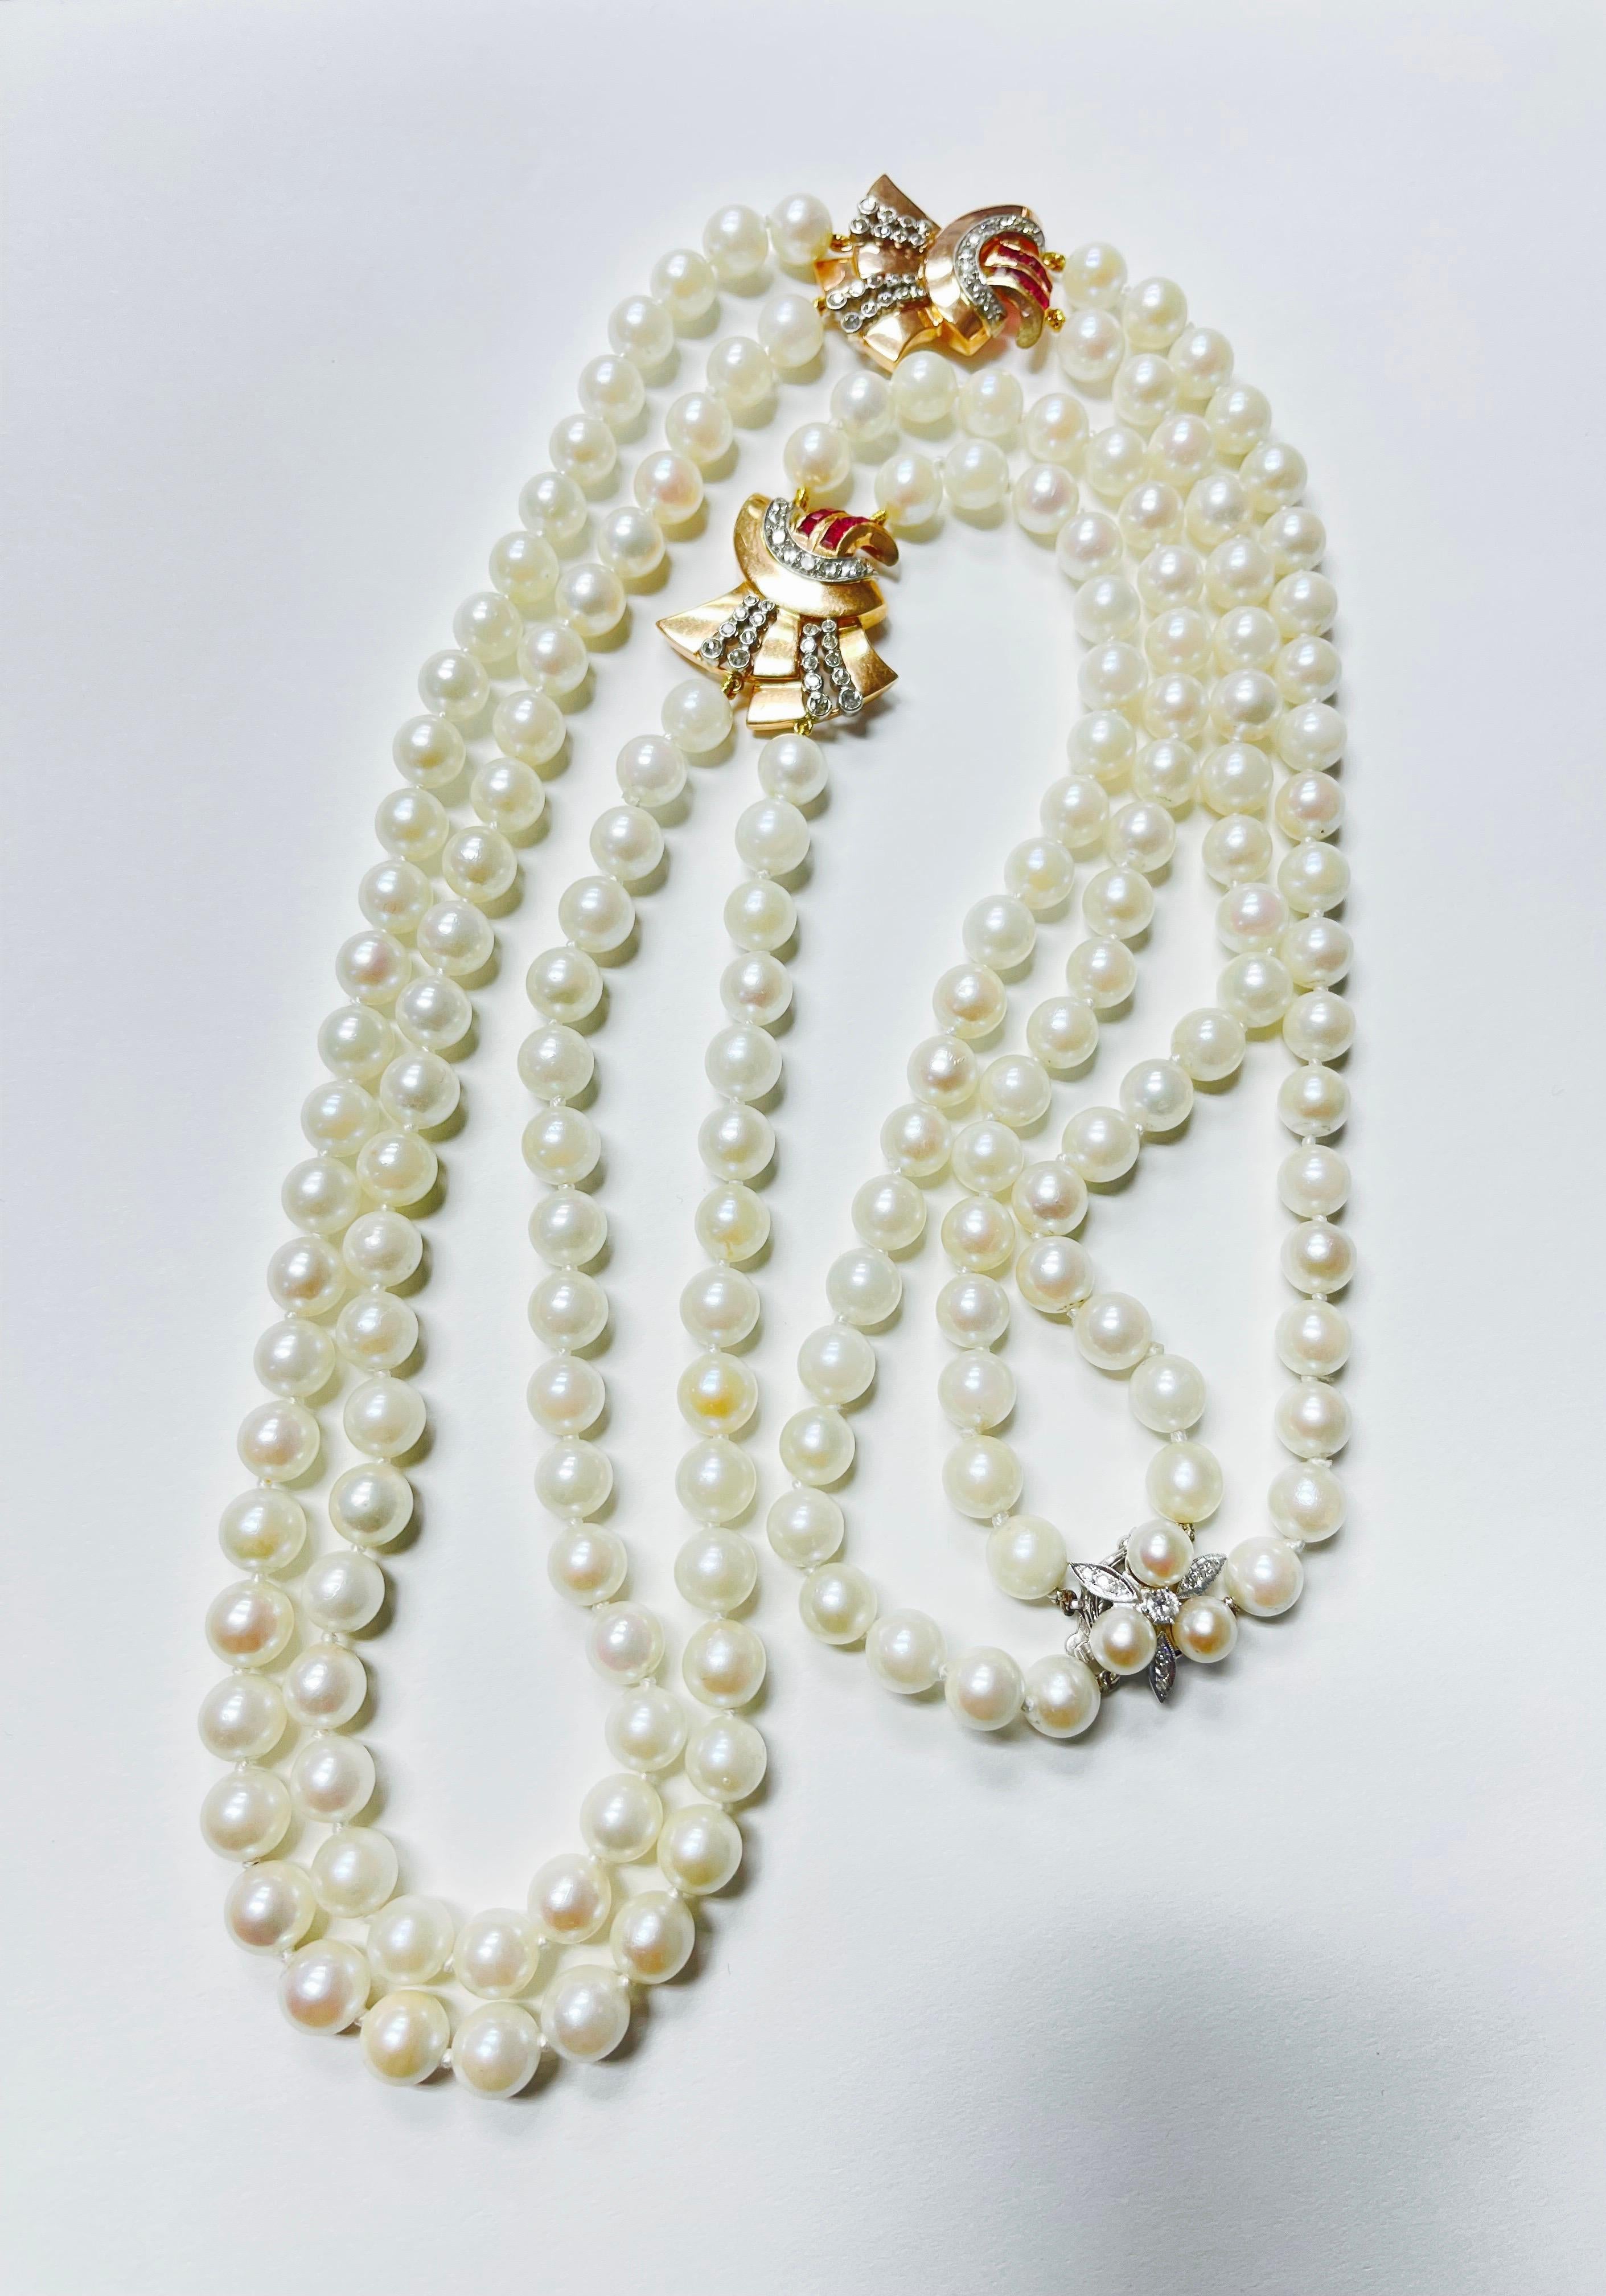 1940 Retro 32 inches pearl, diamond and ruby long double strand necklace in 14k yellow gold. 
The details are as follows : 
Pearl mm size : 8 to 8.5mm 
No of pearls : 170 pearls 
color : off white color 
length of the necklace : 32 inches long 
